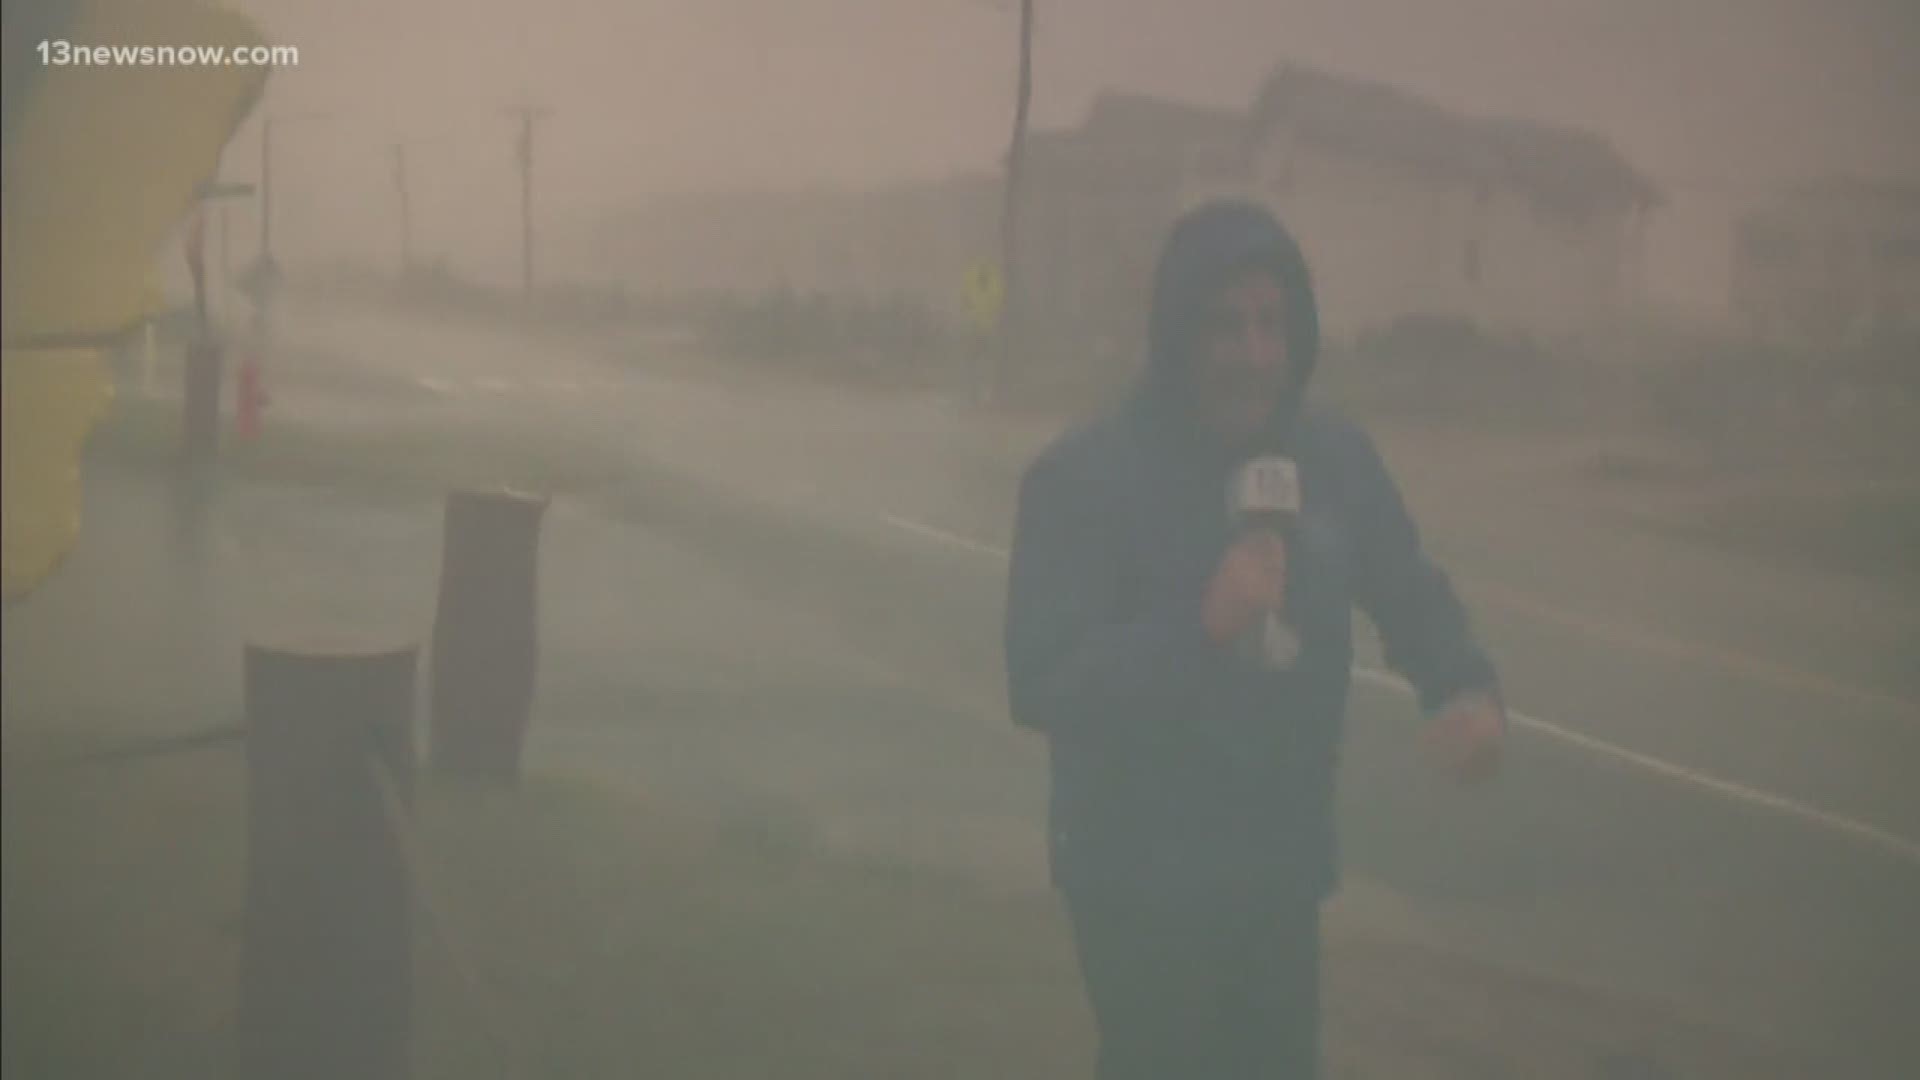 The conditions at NC 12 are not clear and heavy winds are pummeling the area in Nags Head. Tim Pandajis is out there trying to stand up straight as the winds pick up due to Dorian.